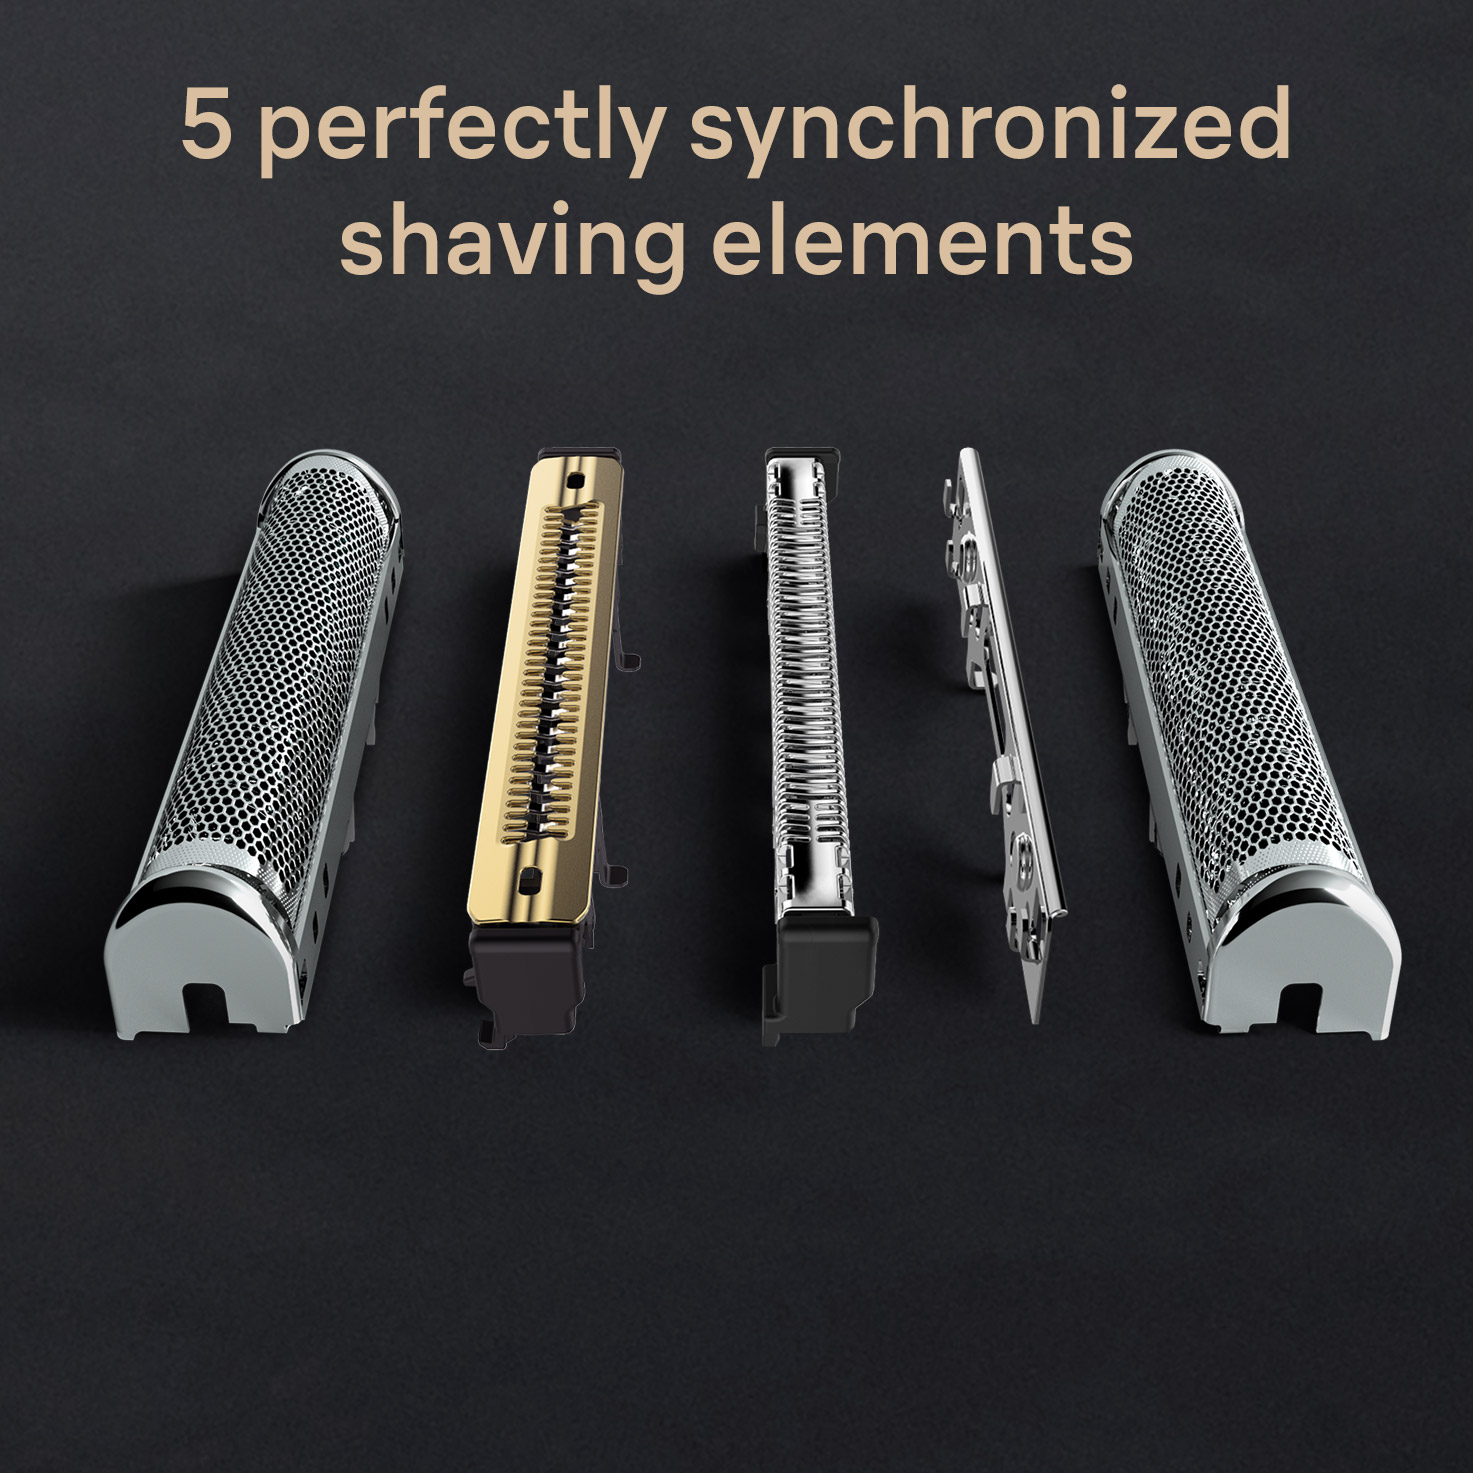 Series 9 Pro+ 9525s Wet & Dry shaver with PowerCase and charging